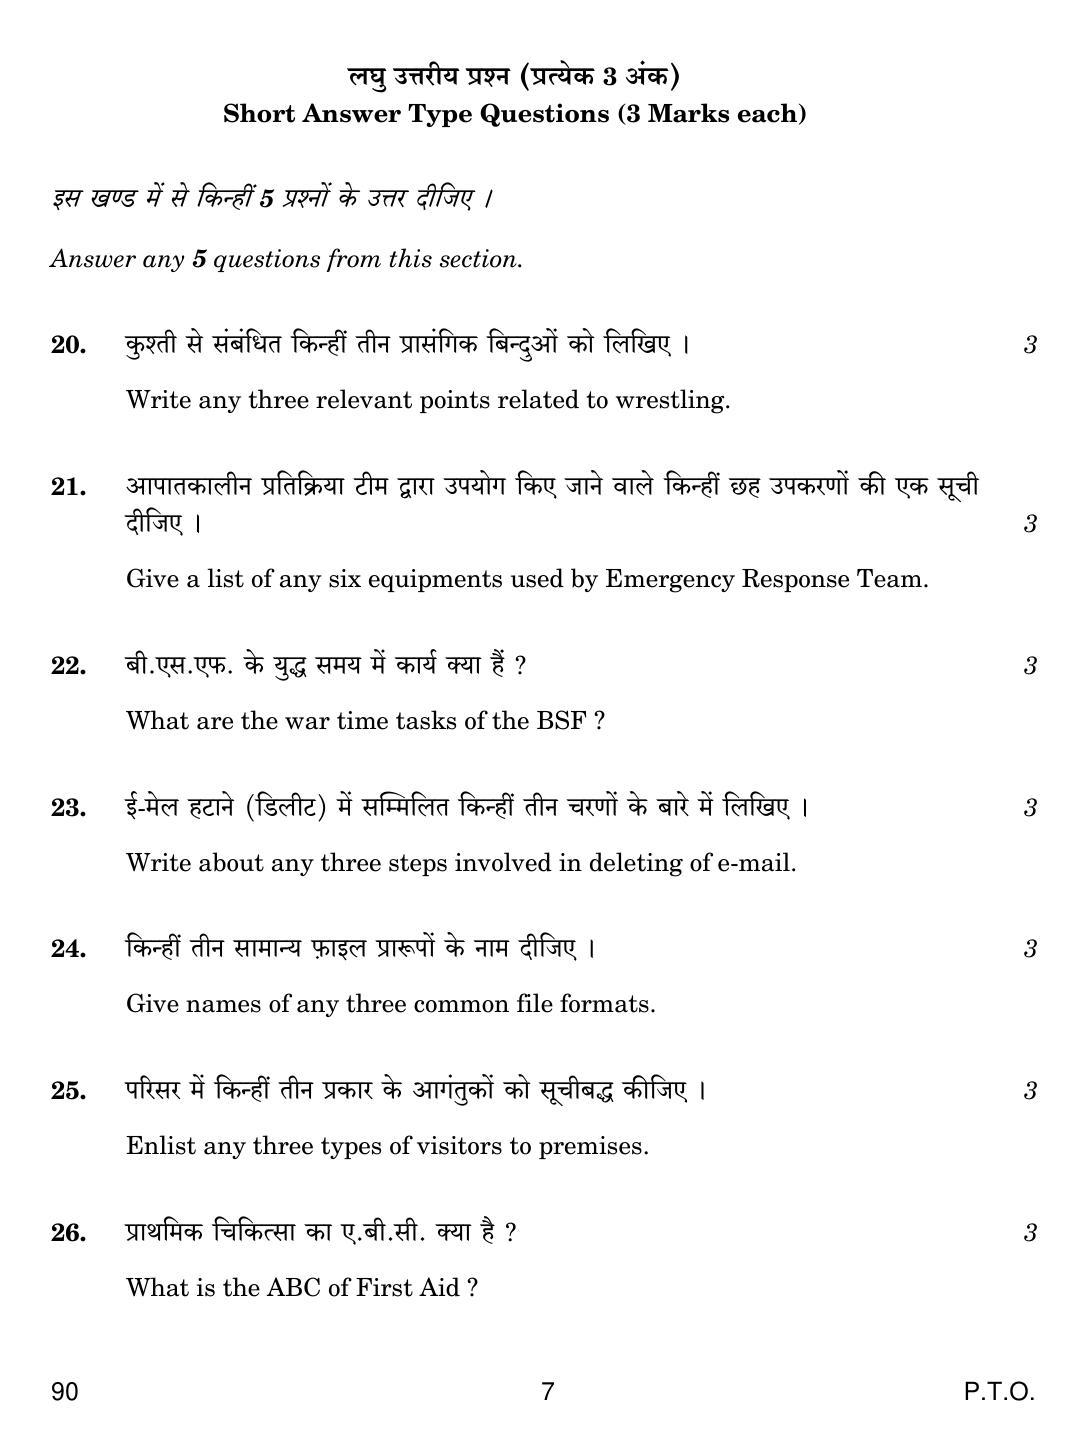 CBSE Class 10 90 SECURITY 2019 Question Paper - Page 7